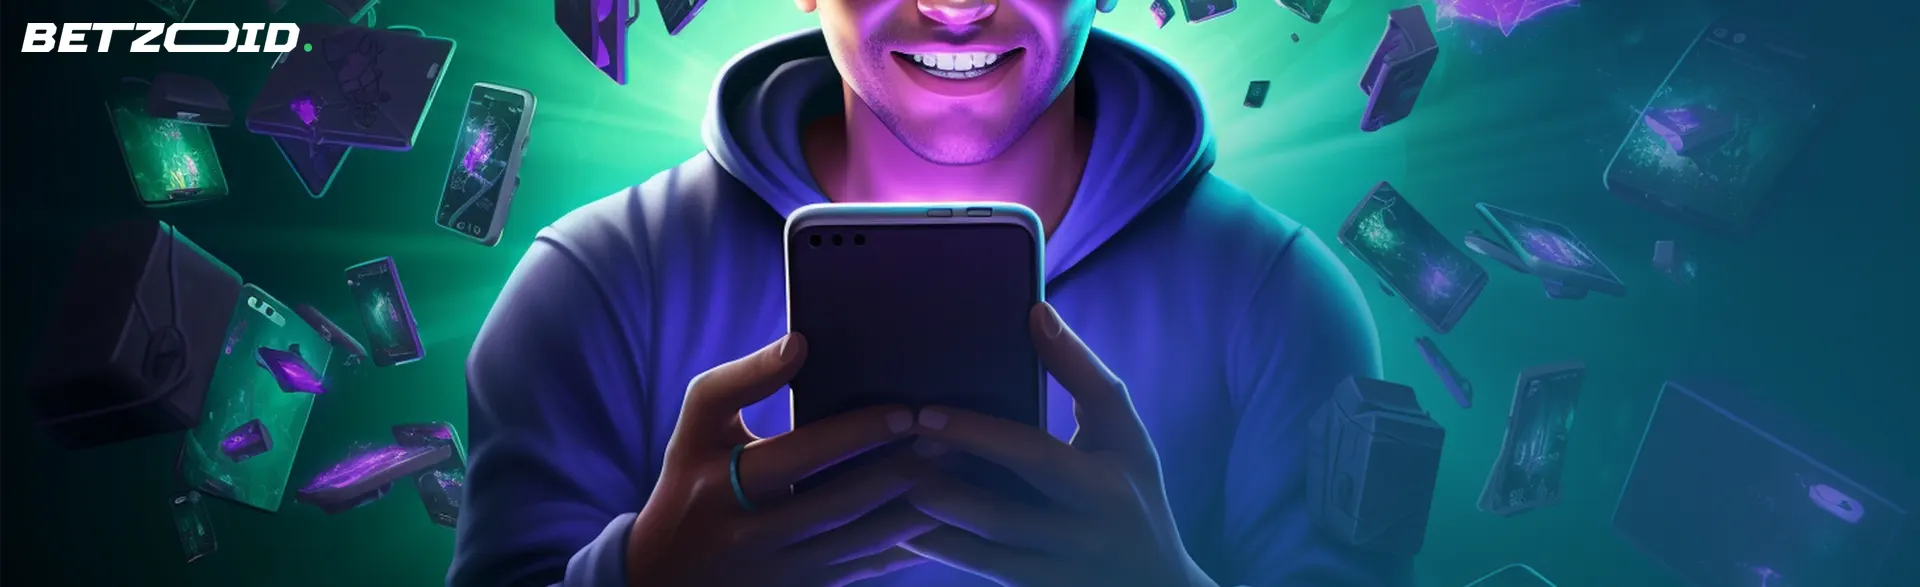 A man gleefully using a smartphone, surrounded by glowing screens representing casinos with mobile deposit.